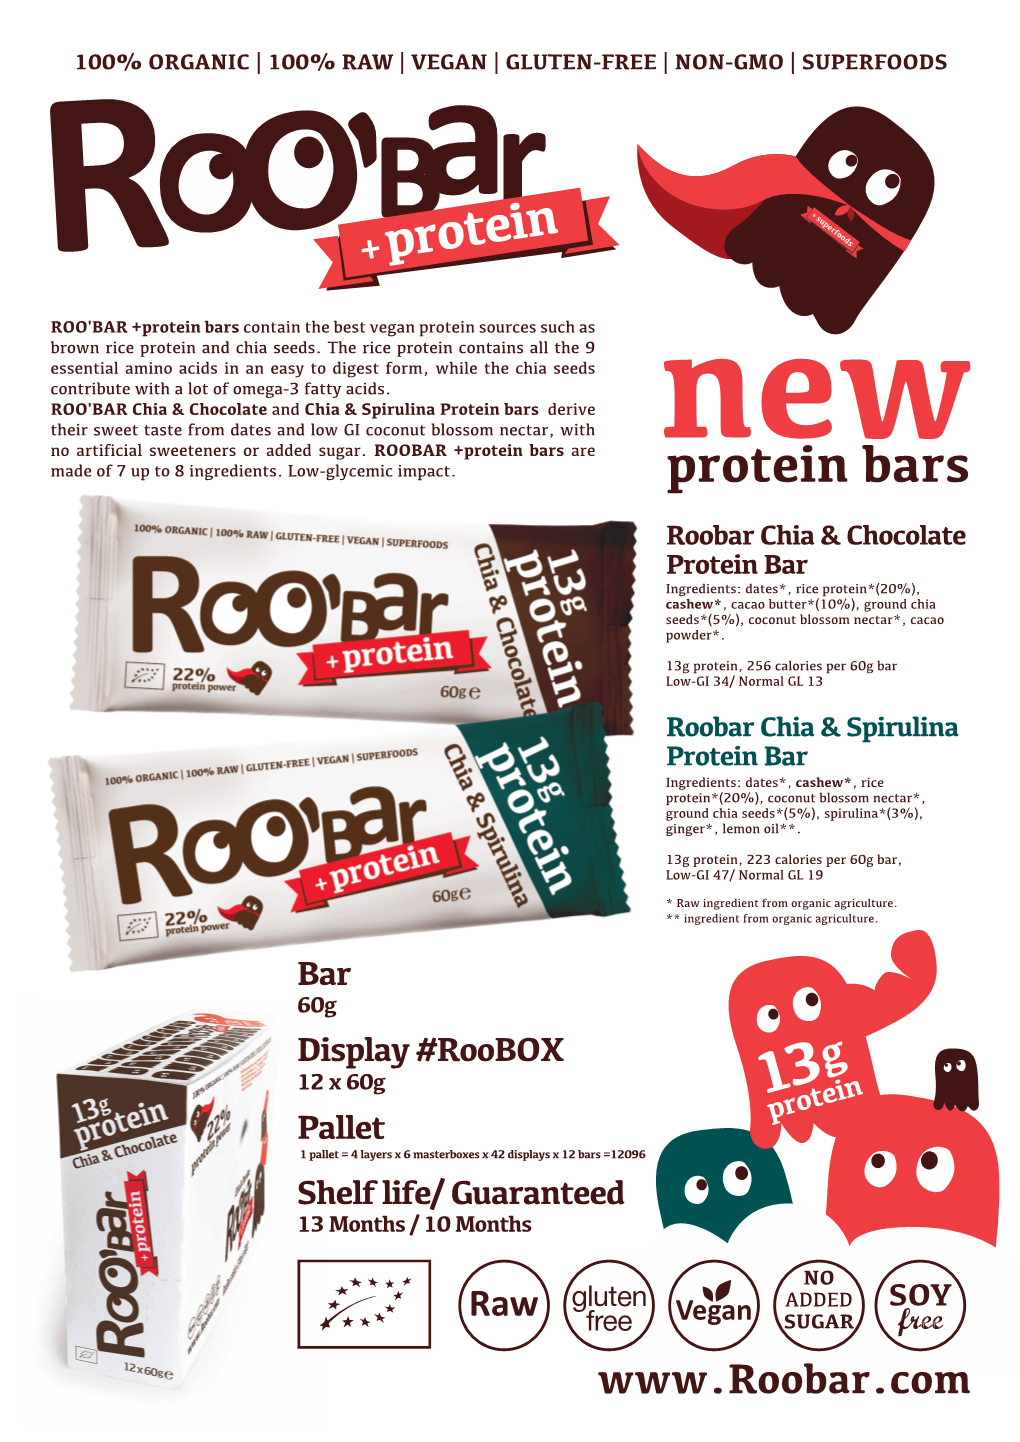 Protein Bars Contain the Best Vegan Protein Sources Such As Brown Rice Protein and Chia Seeds